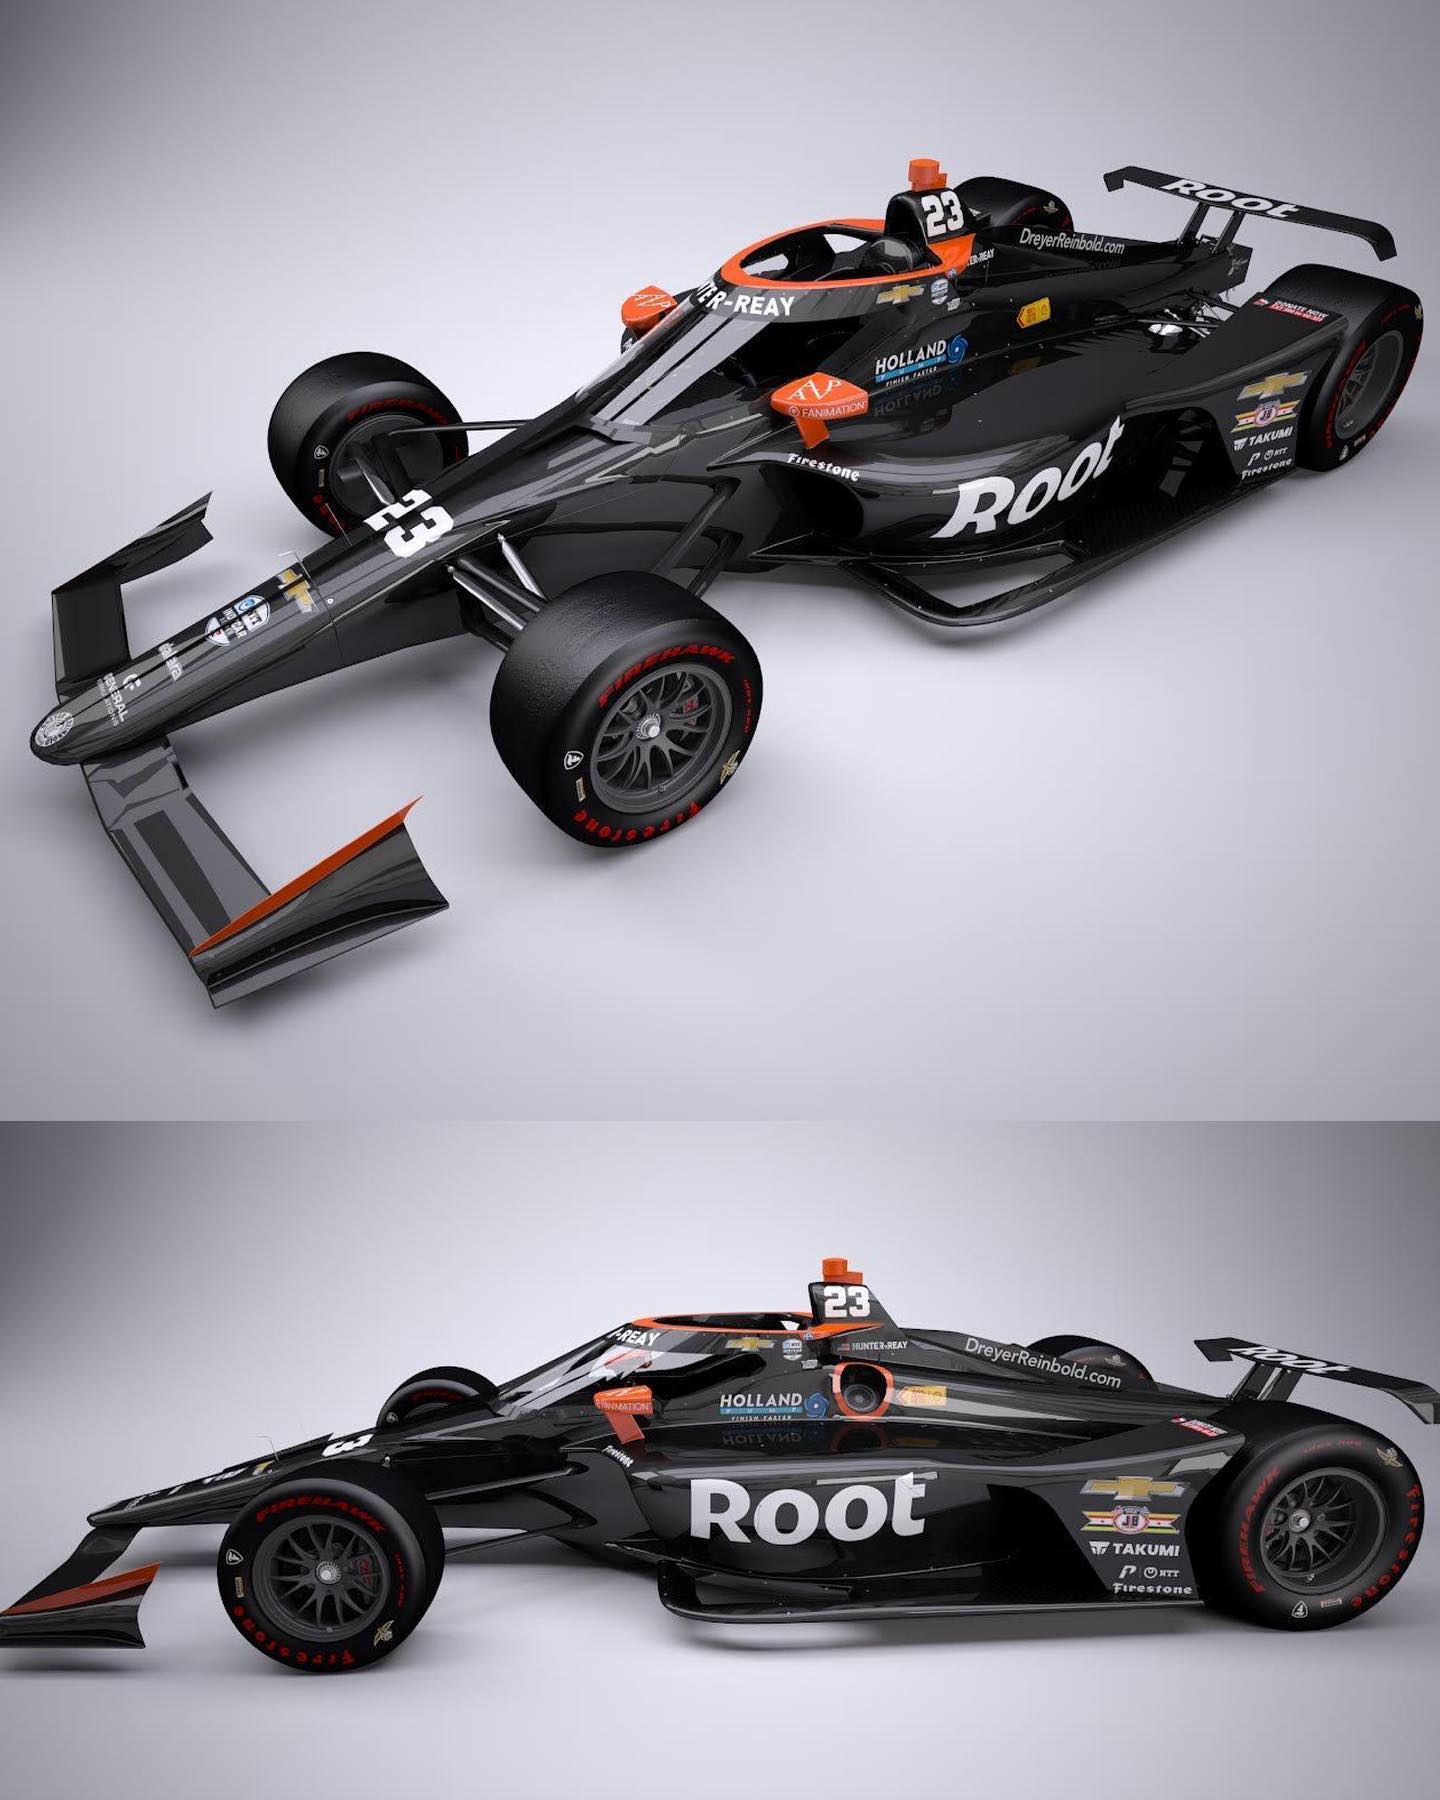 Root Insurance pairs up with Dreyer & Reinbold Racing for the 2023 Indy 500, car driven by Ryan Hunter-Reay